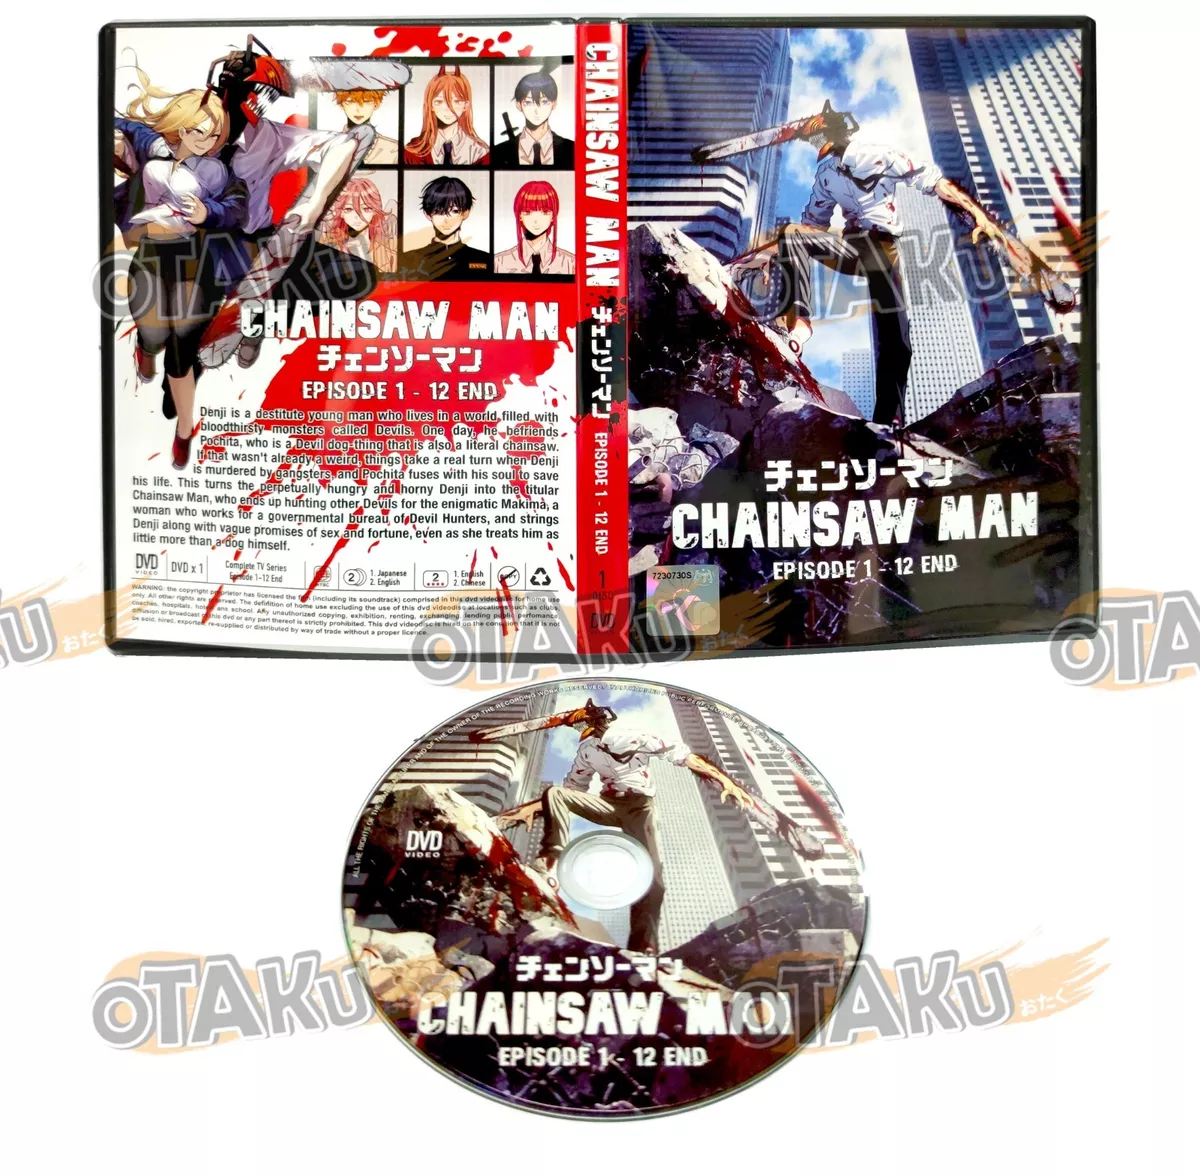 Anime DVD CHAINSAW MAN (Episode 1 - 12 End) English Dubbed All